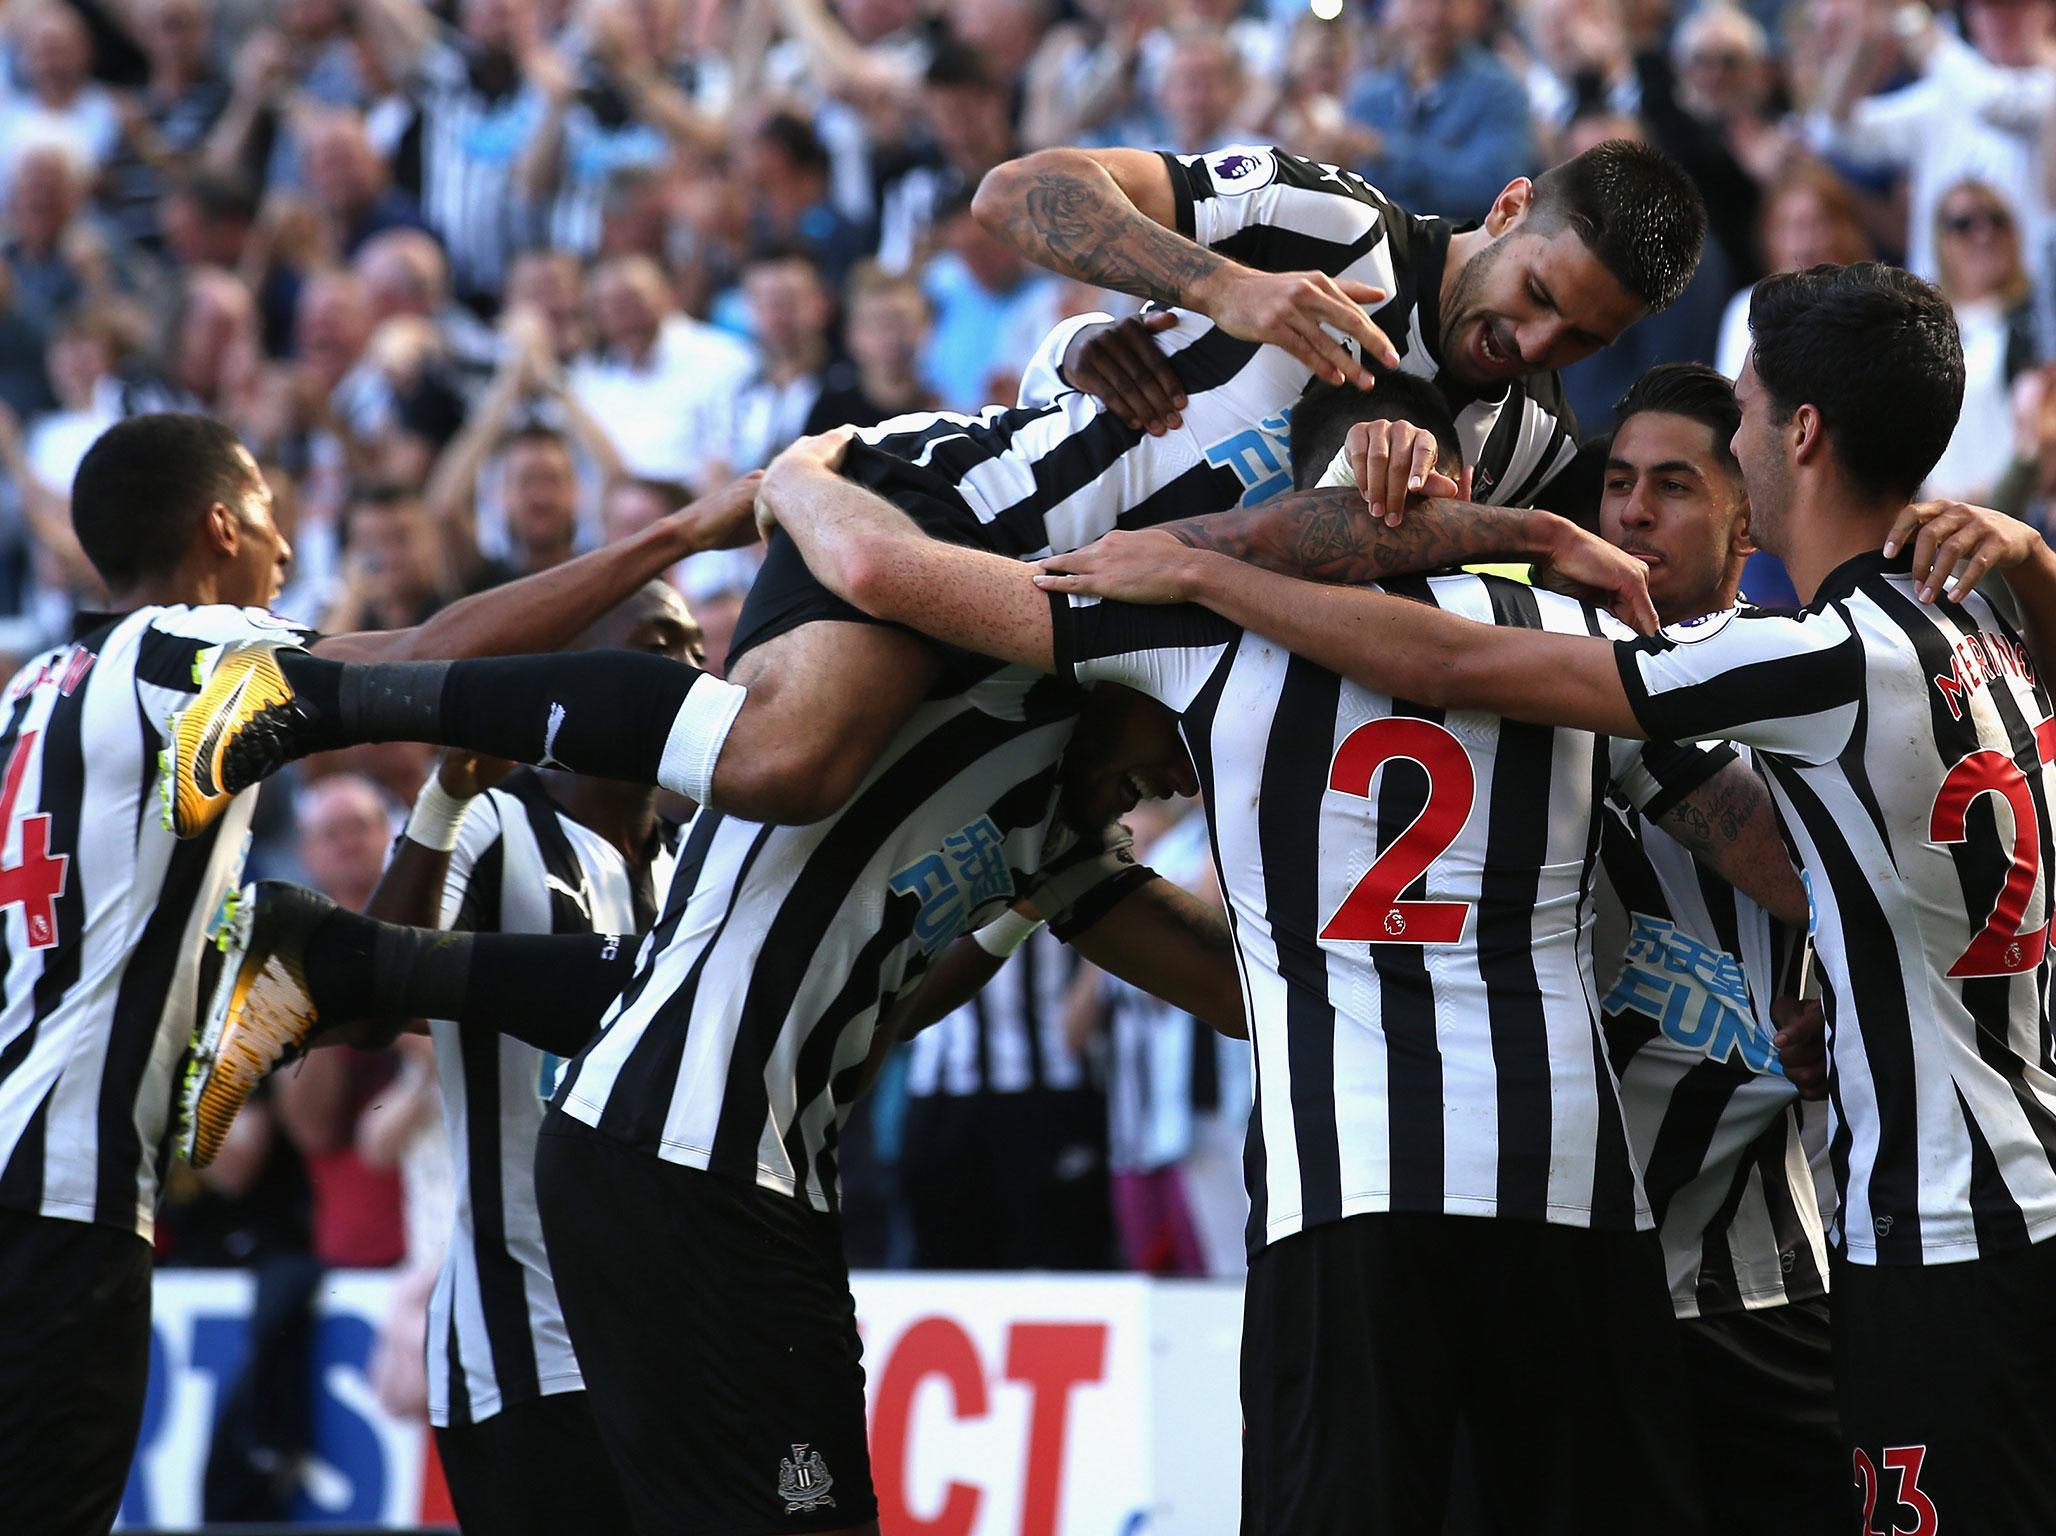 Newcastle will pocket significant bonuses if they survive